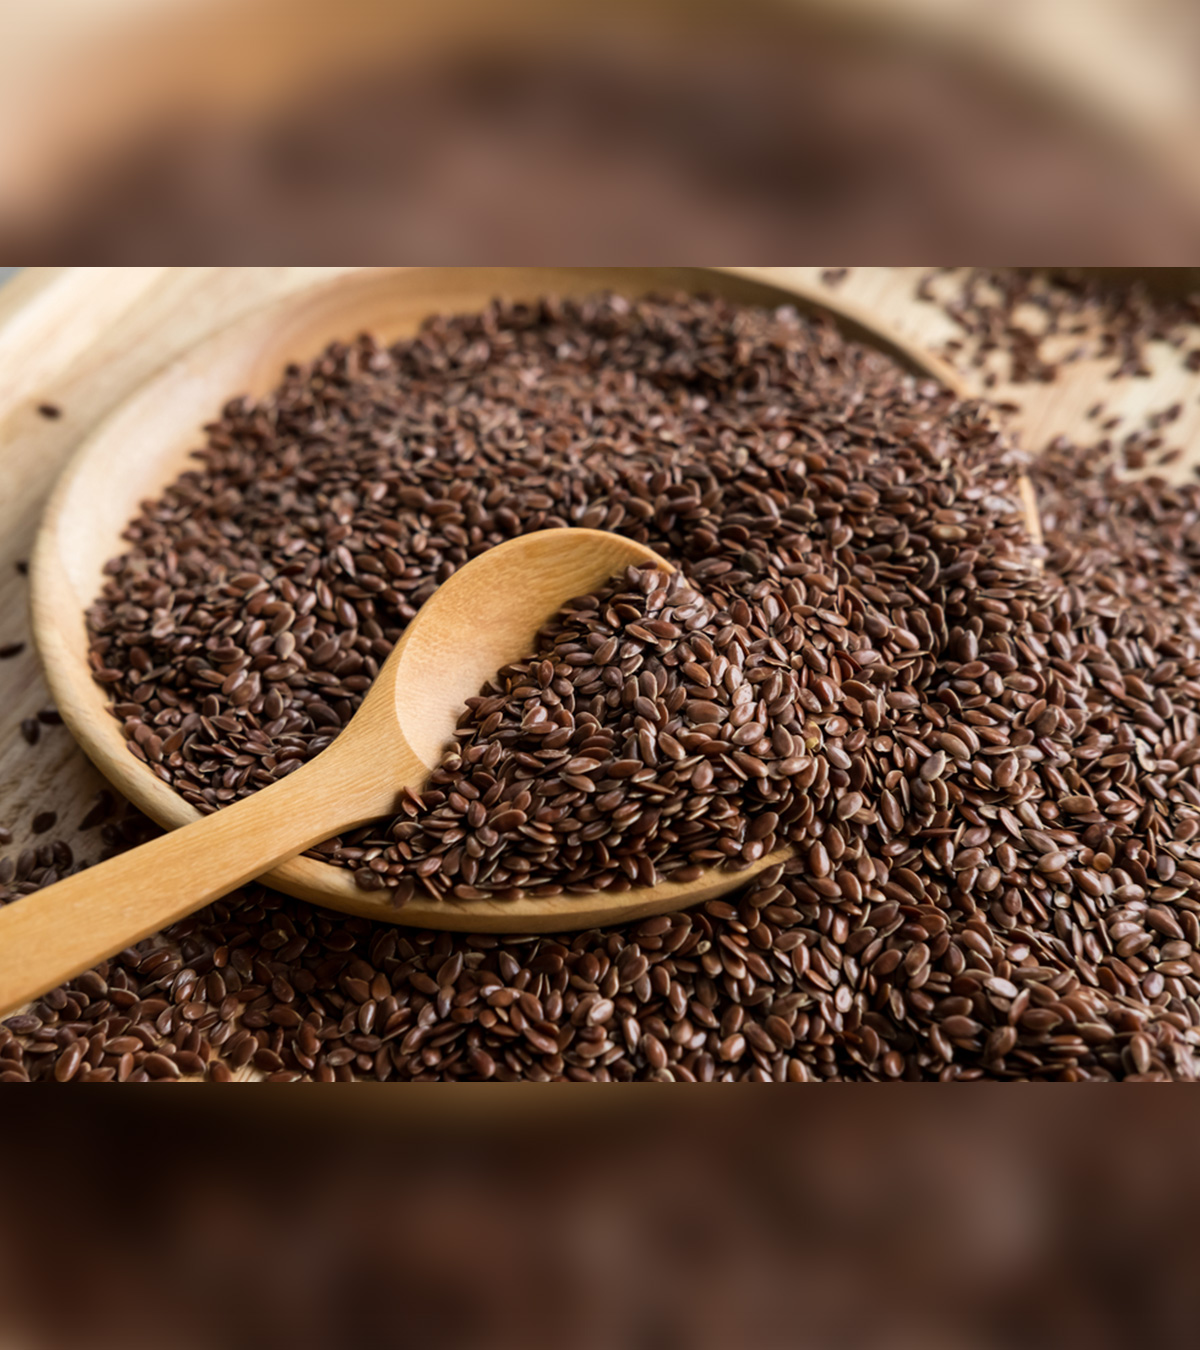 Flaxseed For Babies: Safety, Benefits And Precautions To Take